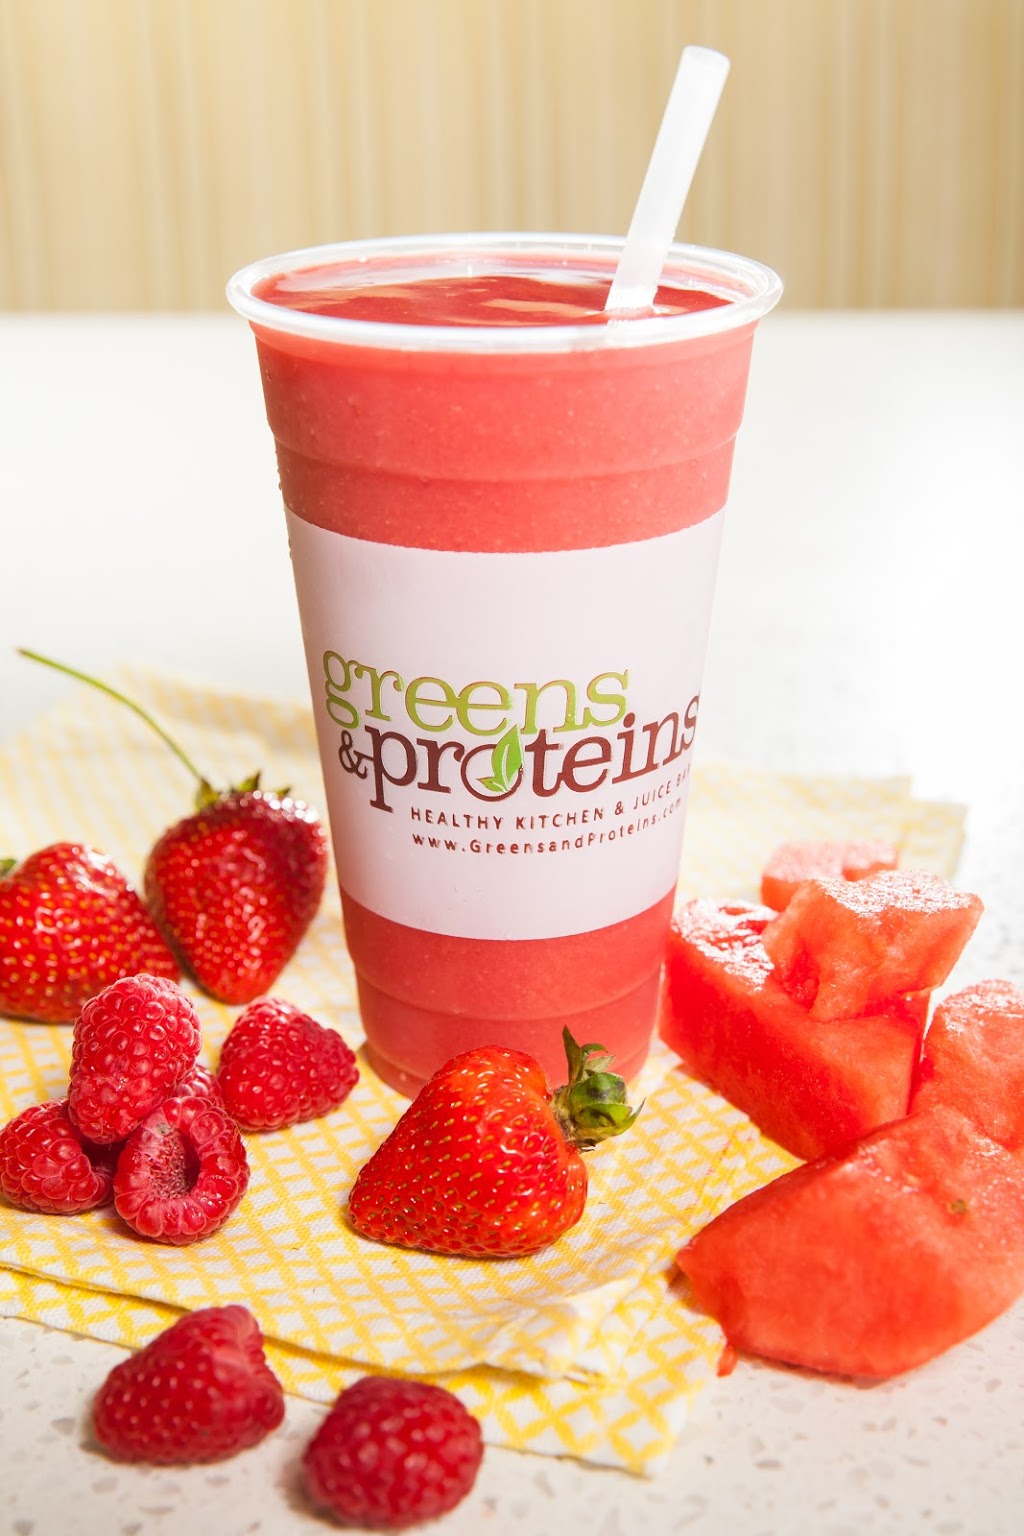 Greens and Proteins | 6180 N Decatur Blvd #106, Las Vegas, NV 89130, USA | Phone: (702) 853-0650